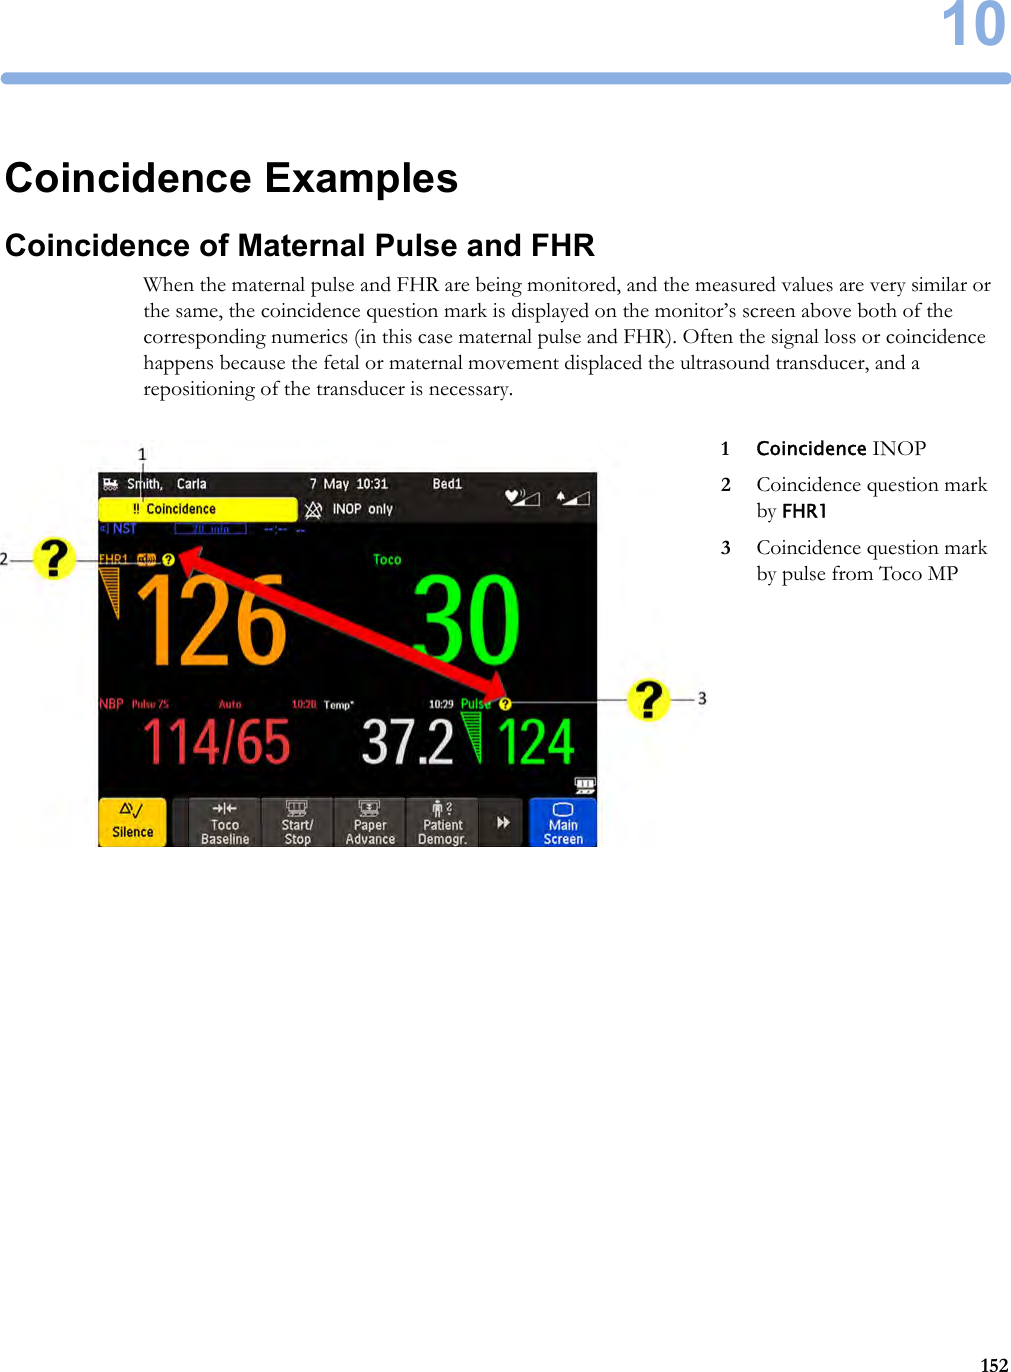 10152Coincidence ExamplesCoincidence of Maternal Pulse and FHRWhen the maternal pulse and FHR are being monitored, and the measured values are very similar or the same, the coincidence question mark is displayed on the monitor’s screen above both of the corresponding numerics (in this case maternal pulse and FHR). Often the signal loss or coincidence happens because the fetal or maternal movement displaced the ultrasound transducer, and a repositioning of the transducer is necessary.1Coincidence INOP2Coincidence question mark by FHR13Coincidence question mark by pulse from Toco MP